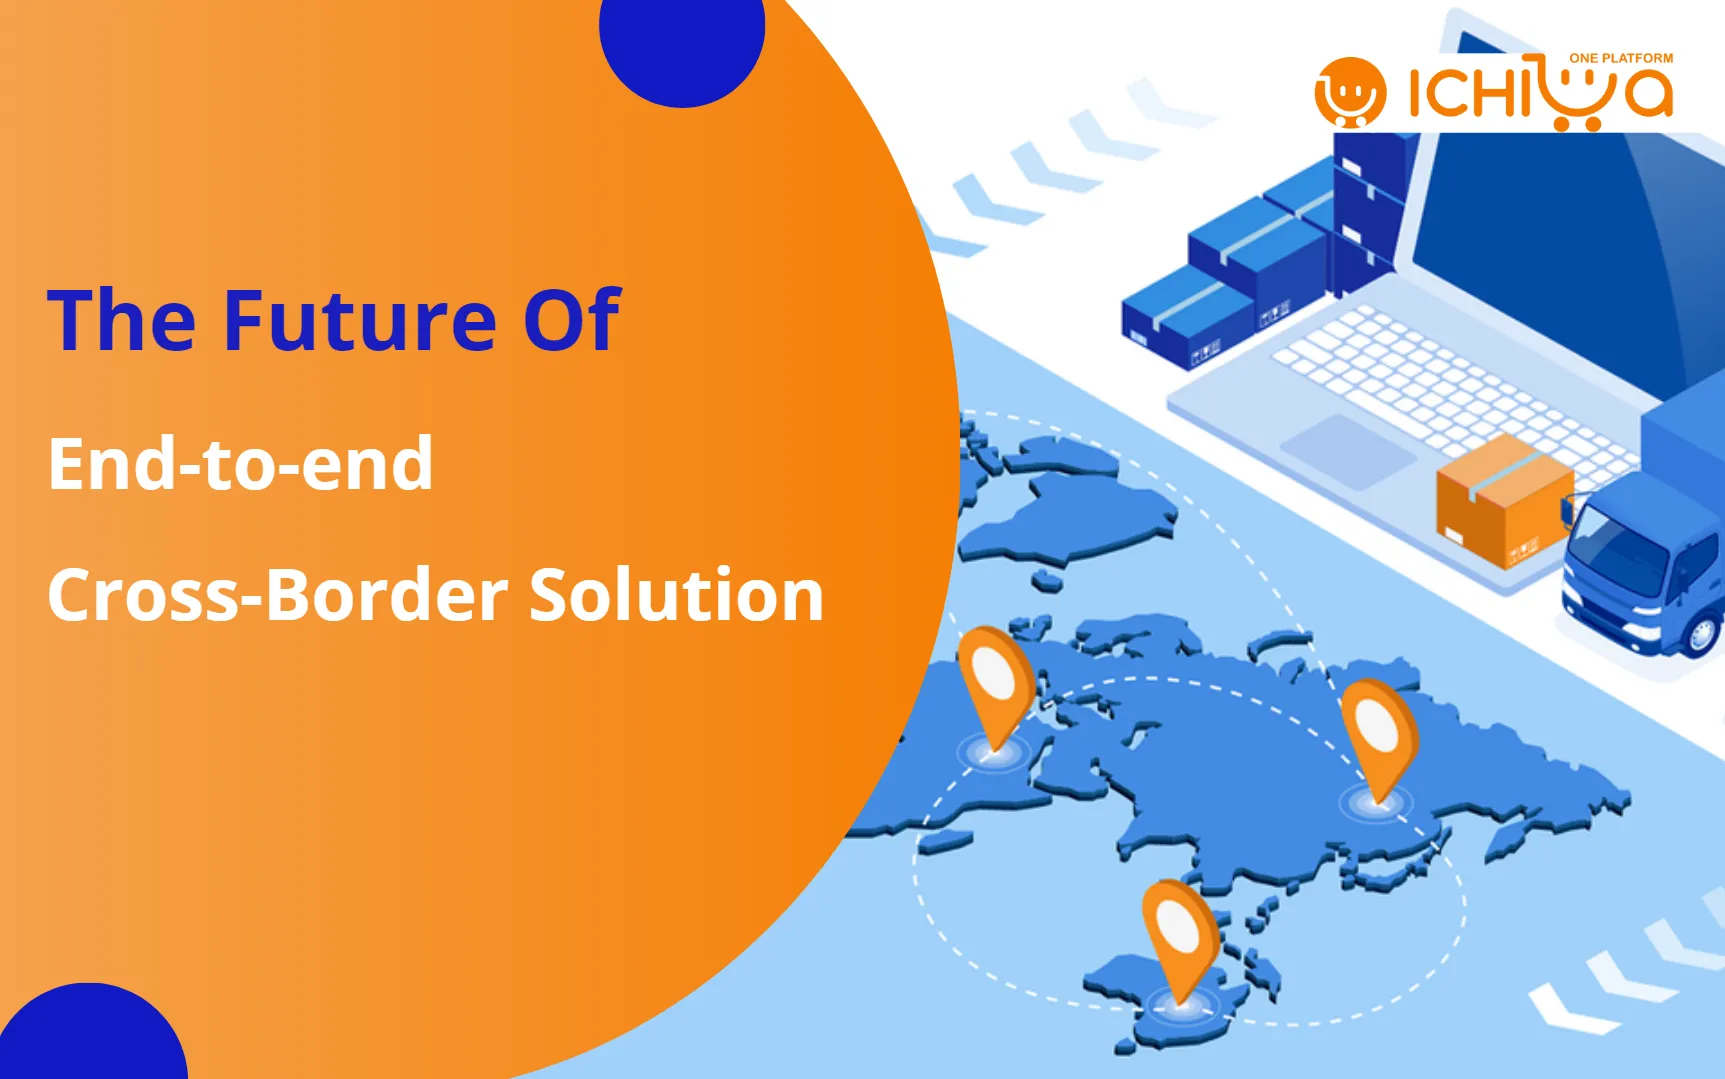 The Future Of End-to-end Cross-Border Solution